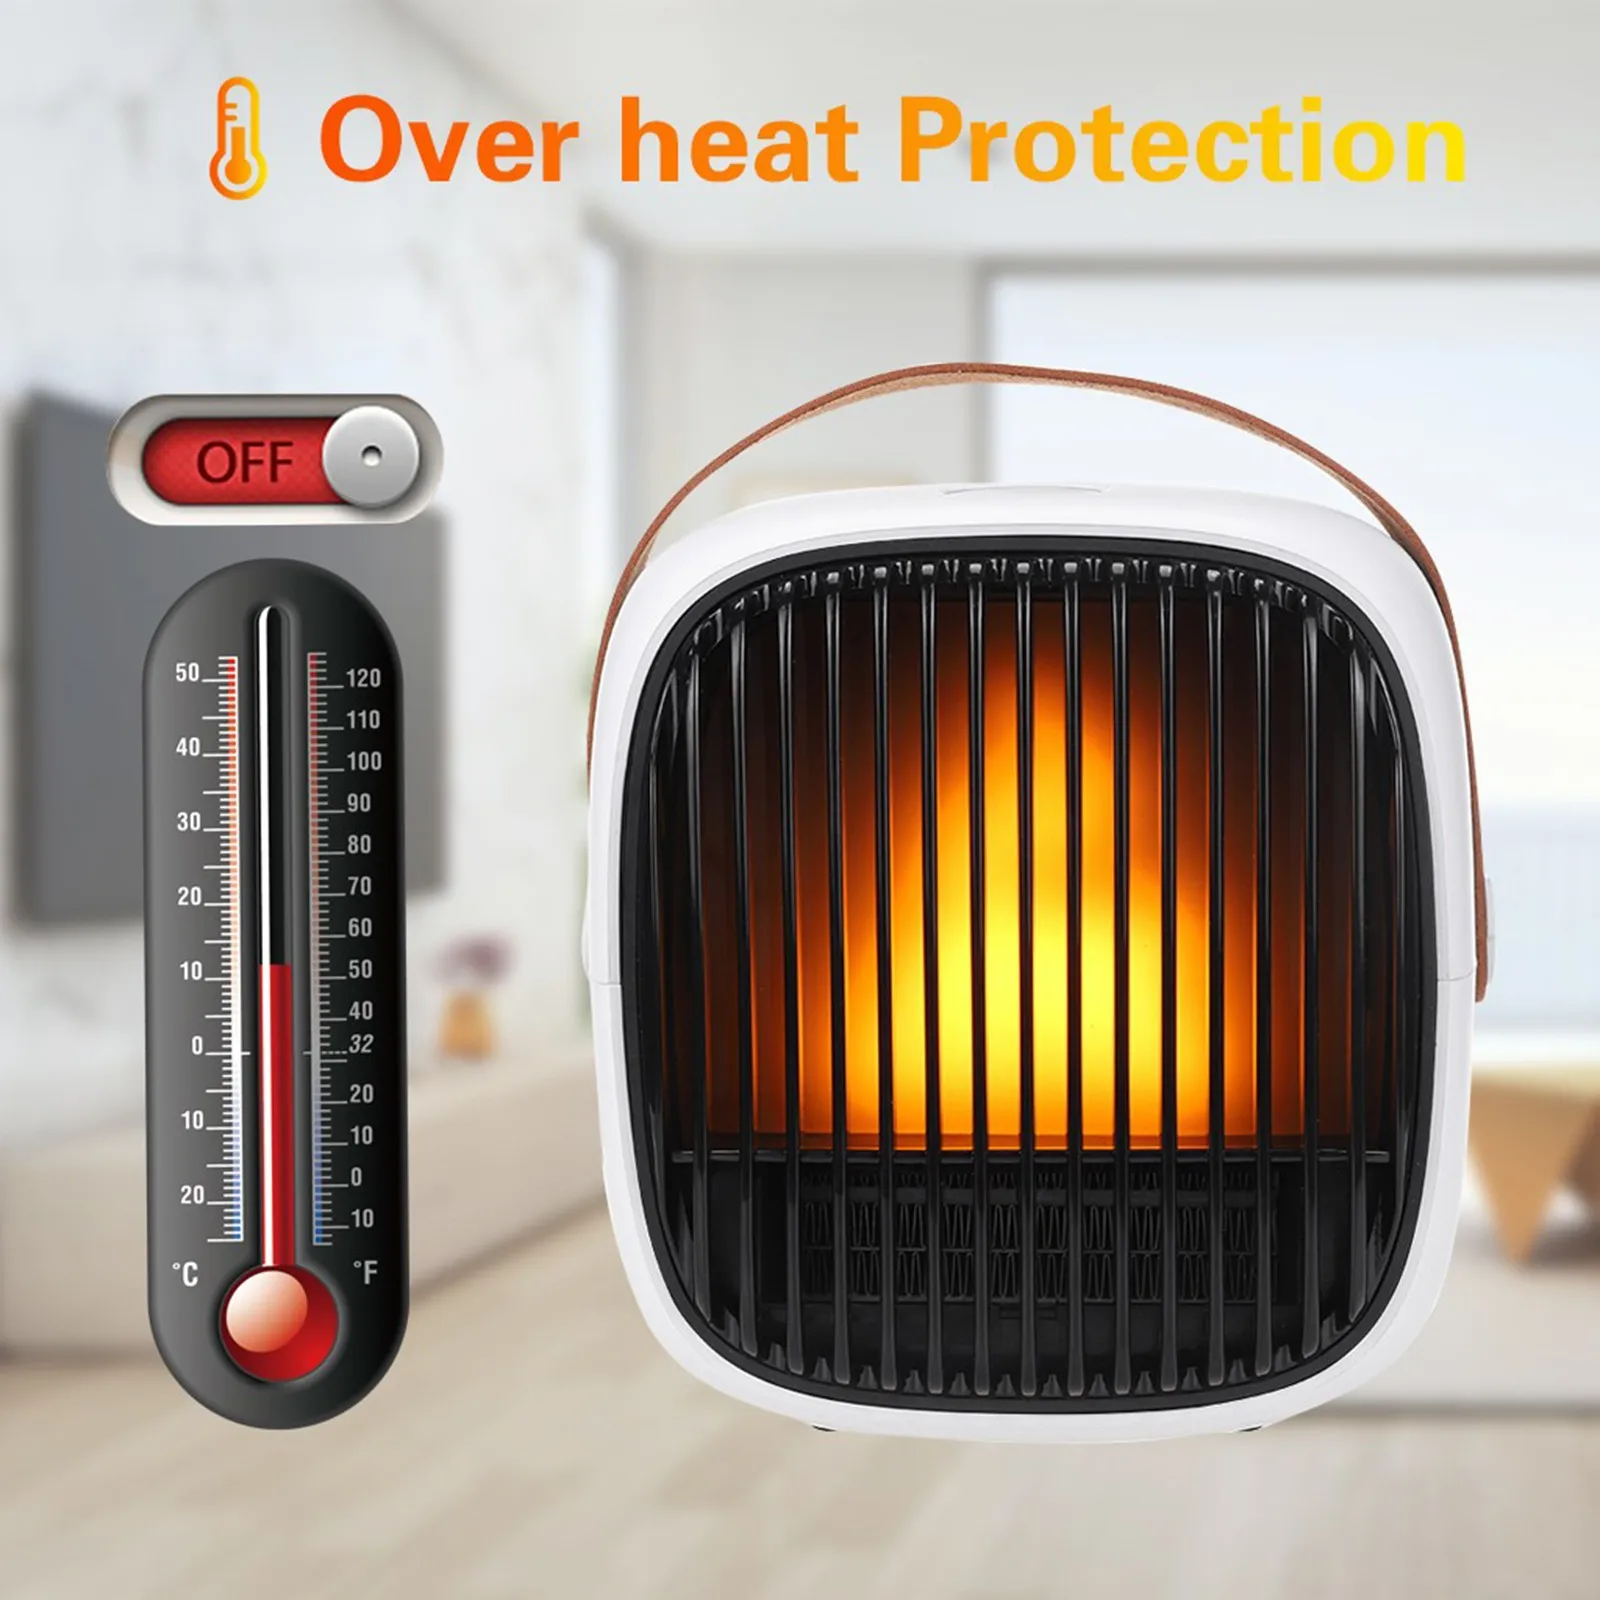 Heating Fast Space Heater Cool Air Fan for Under Desk Floor Office Home AGKupel Mini Ceramic Fan Heater 800W Portable Electric Heater with Timmer Tip-Over Overheat Protection 